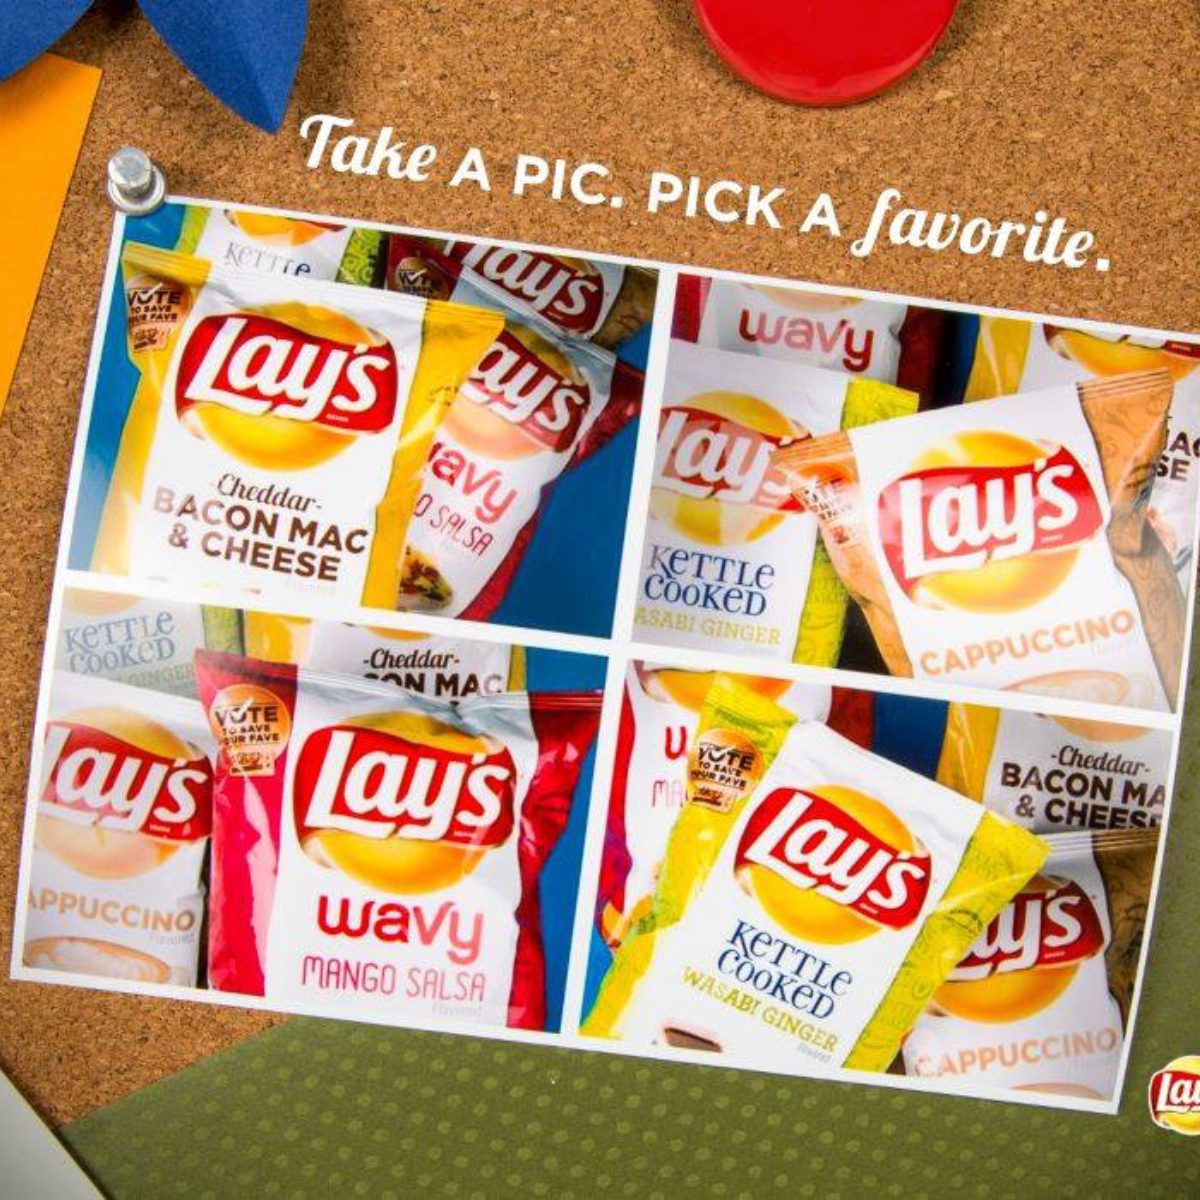 <p><strong><a class="SWhtmlLink" href="https://www.fritolay.com" rel="noopener">Frito Lay</a>, Plano</strong></p> <p>Lay's recent <em>Do Us A Flavor </em>contest led to some pretty wacky flavored chips, including crispy taco, cappuccino and Southern biscuits and gravy. (<a class="SWhtmlLink" href="https://www.tasteofhome.com/article/lays-potato-chips/" rel="noopener">We just had to give them a taste test!</a>) It not only boosted sales, but it gave the company a leg-up with millennials, who loved the digital contest.</p>